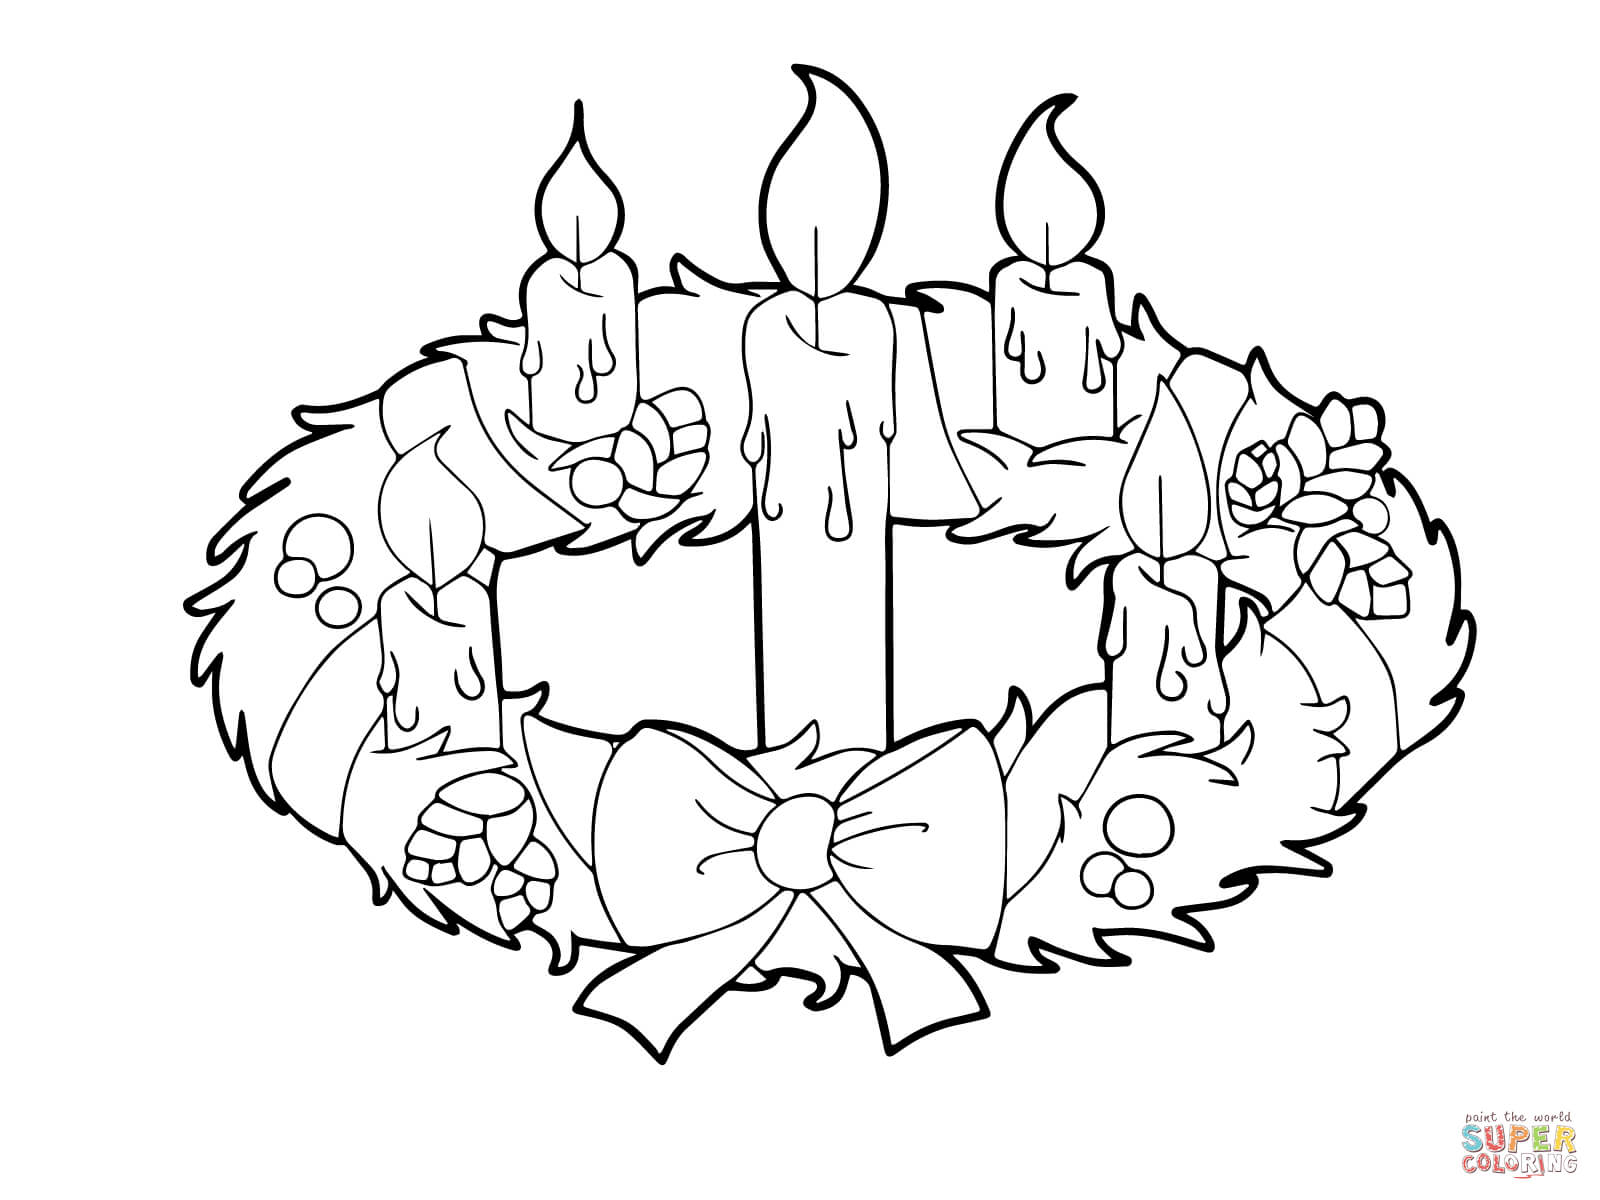 Advent Wreath and Candles coloring page | Free Printable Coloring ...